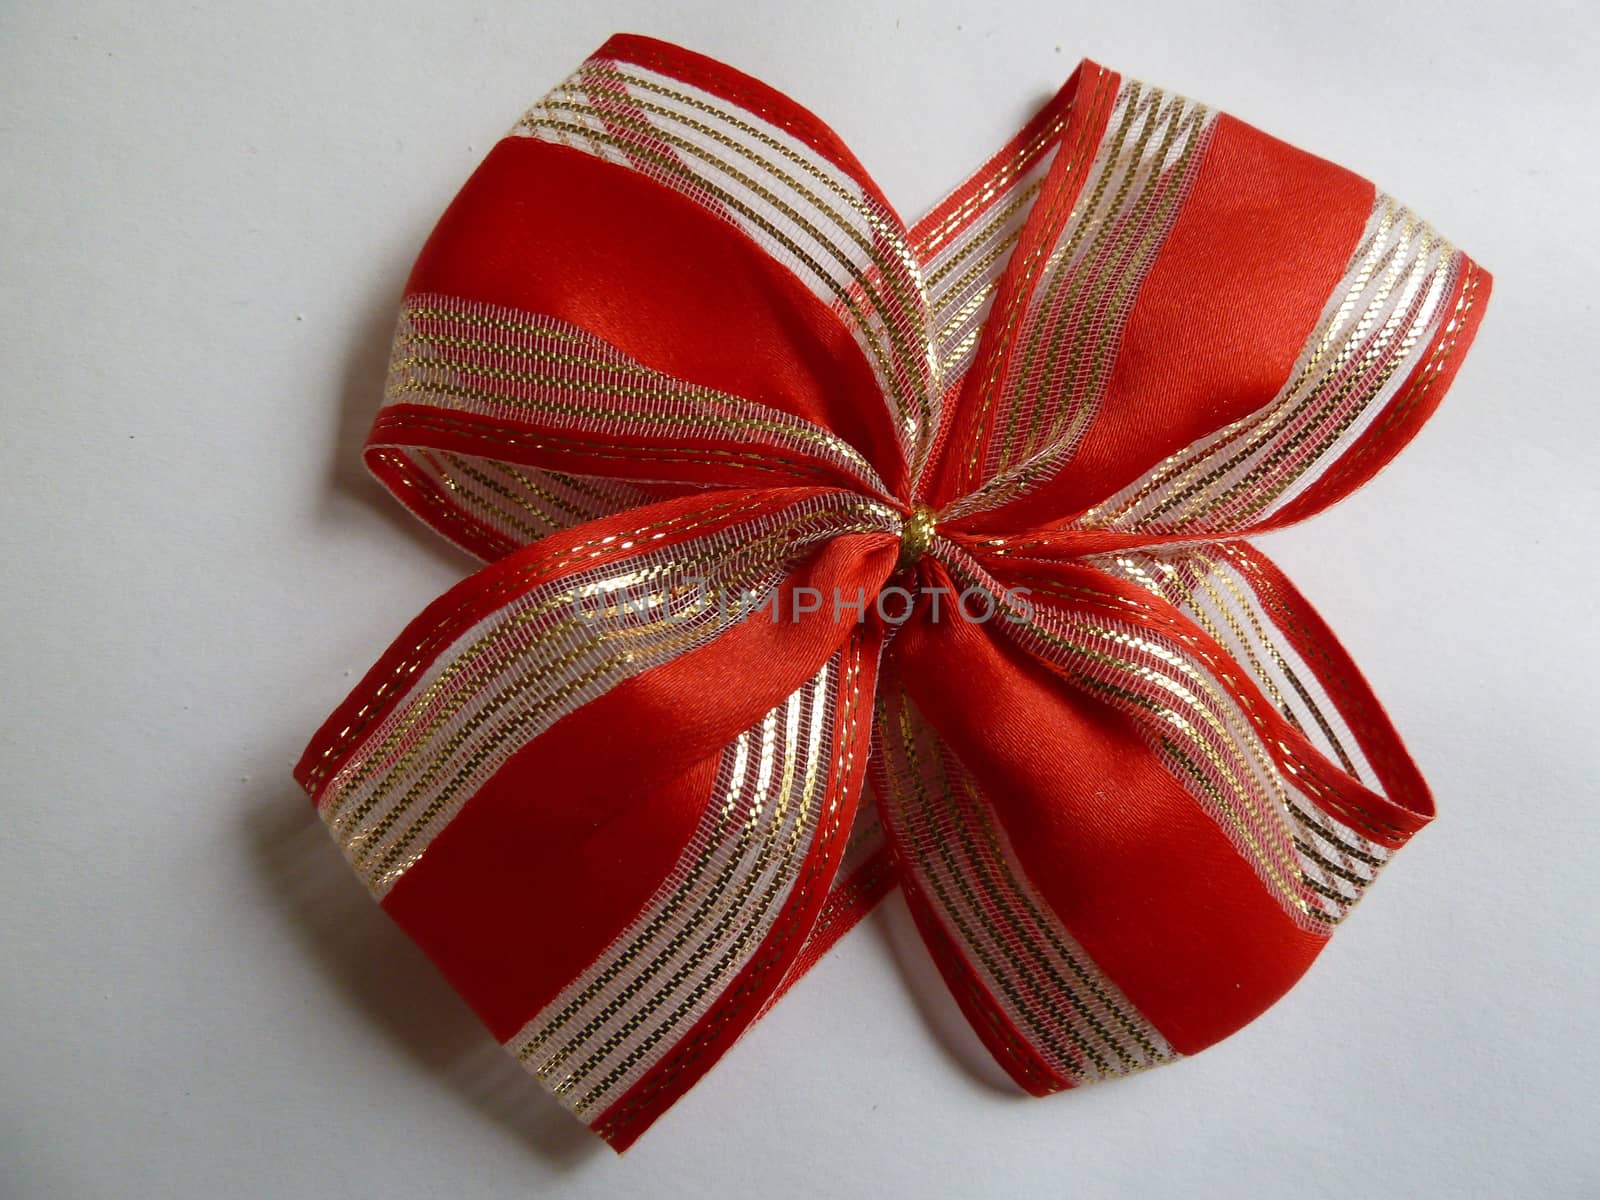 Bright red and gold ribbon on a white background